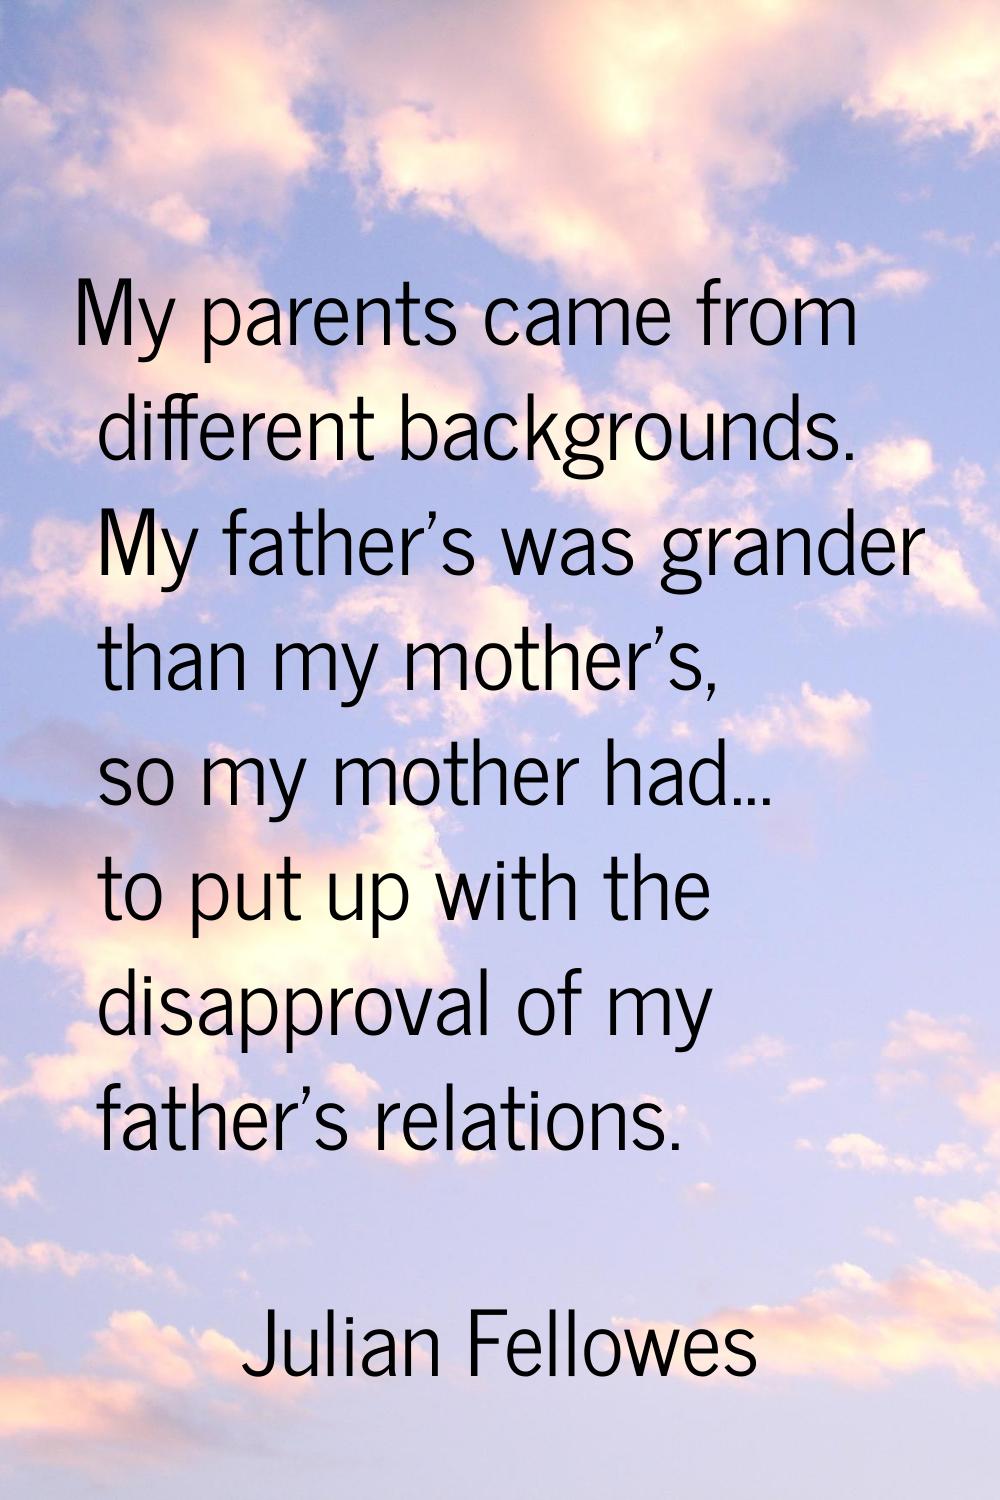 My parents came from different backgrounds. My father's was grander than my mother's, so my mother 